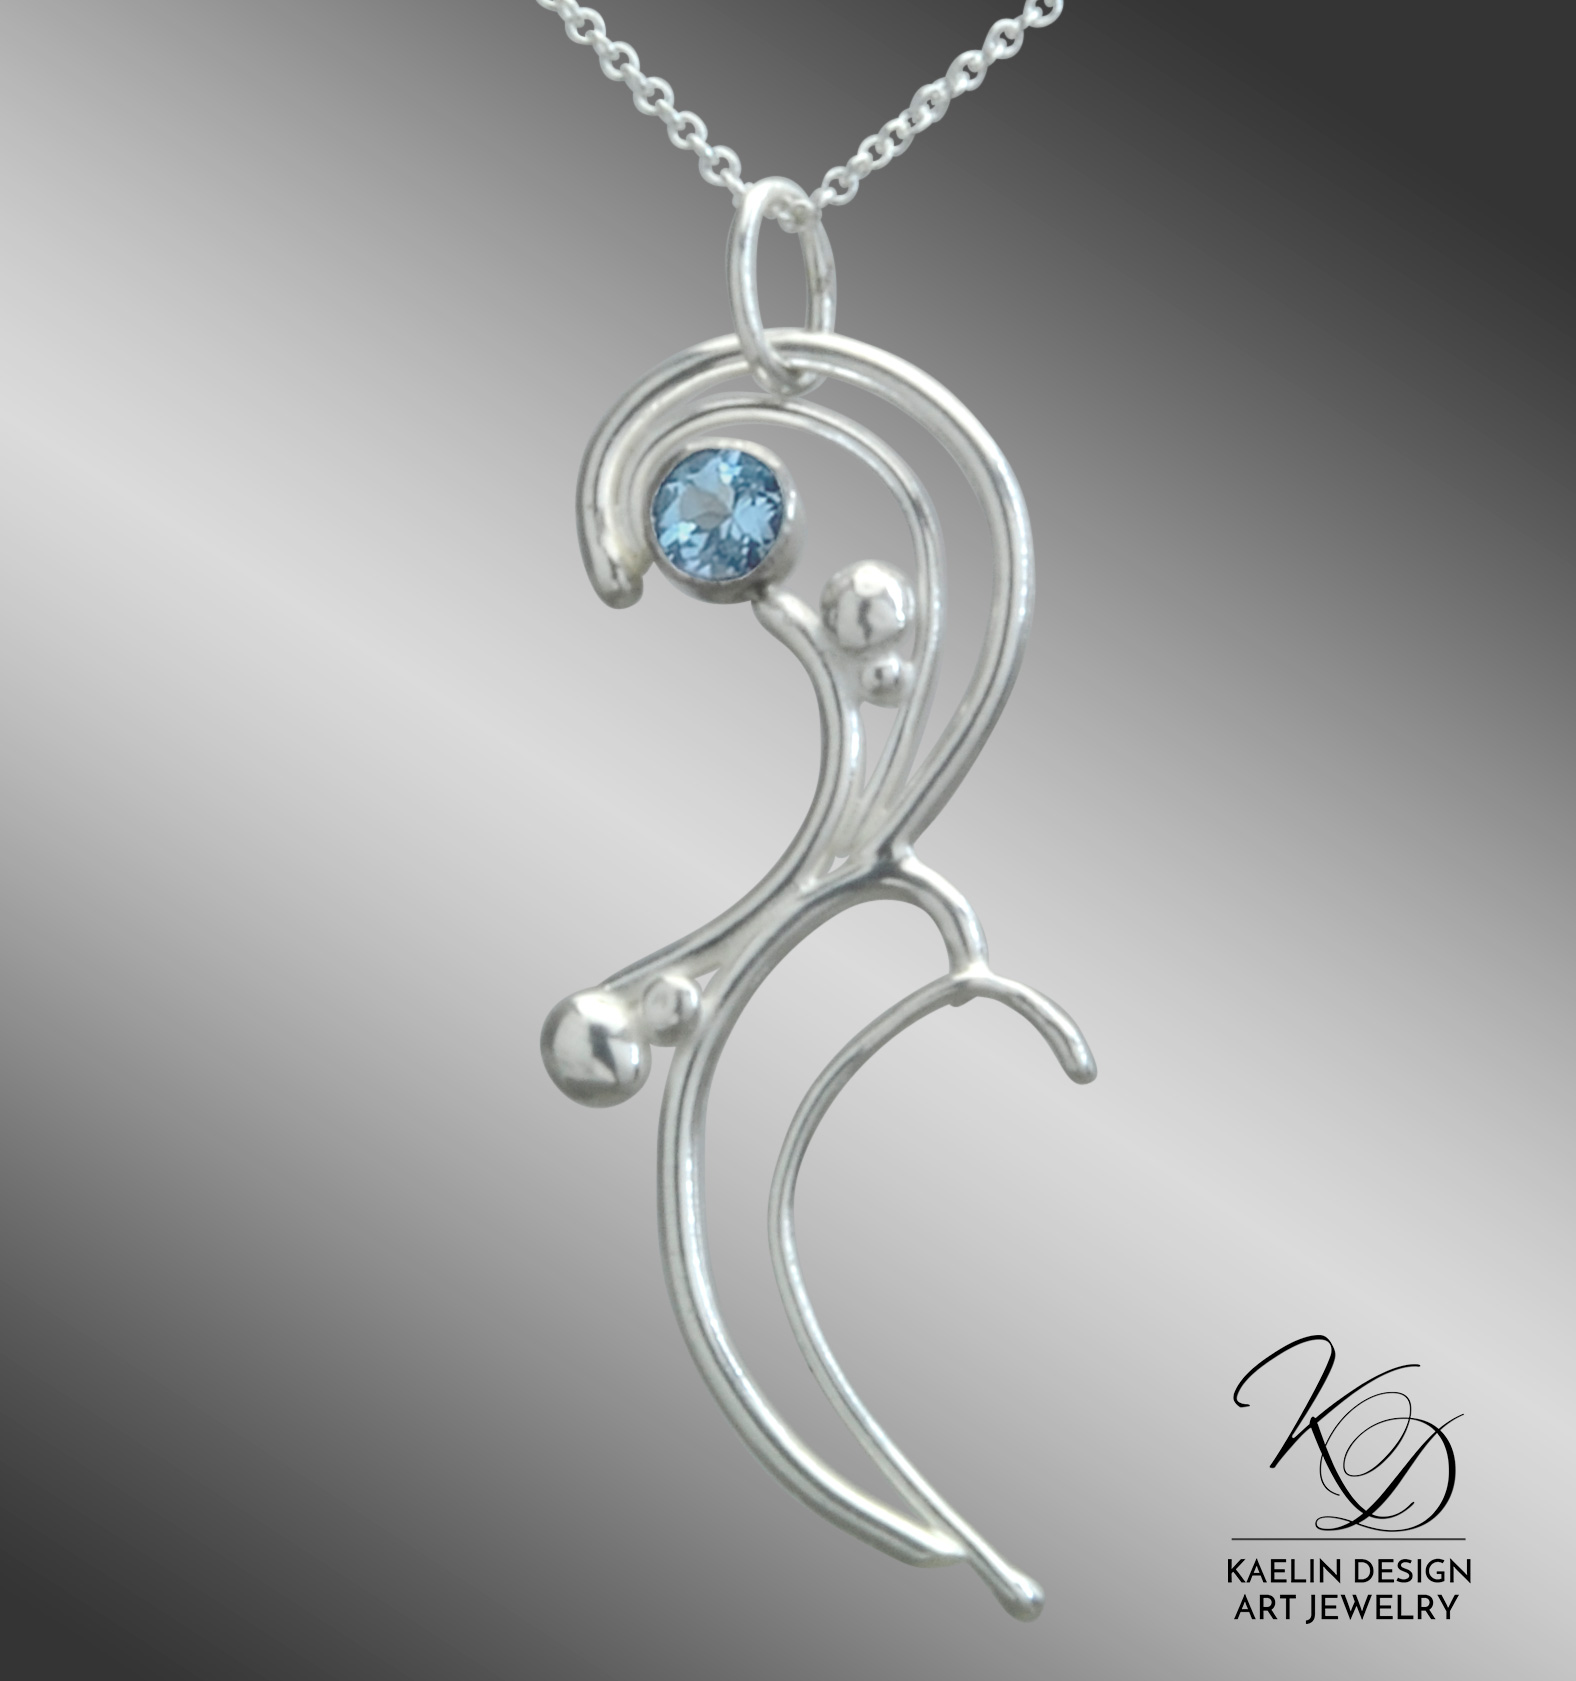 Talise Blue Topaz and Hand Forged Sterling Silver Art Jewelry Pendant by Kaelin Design